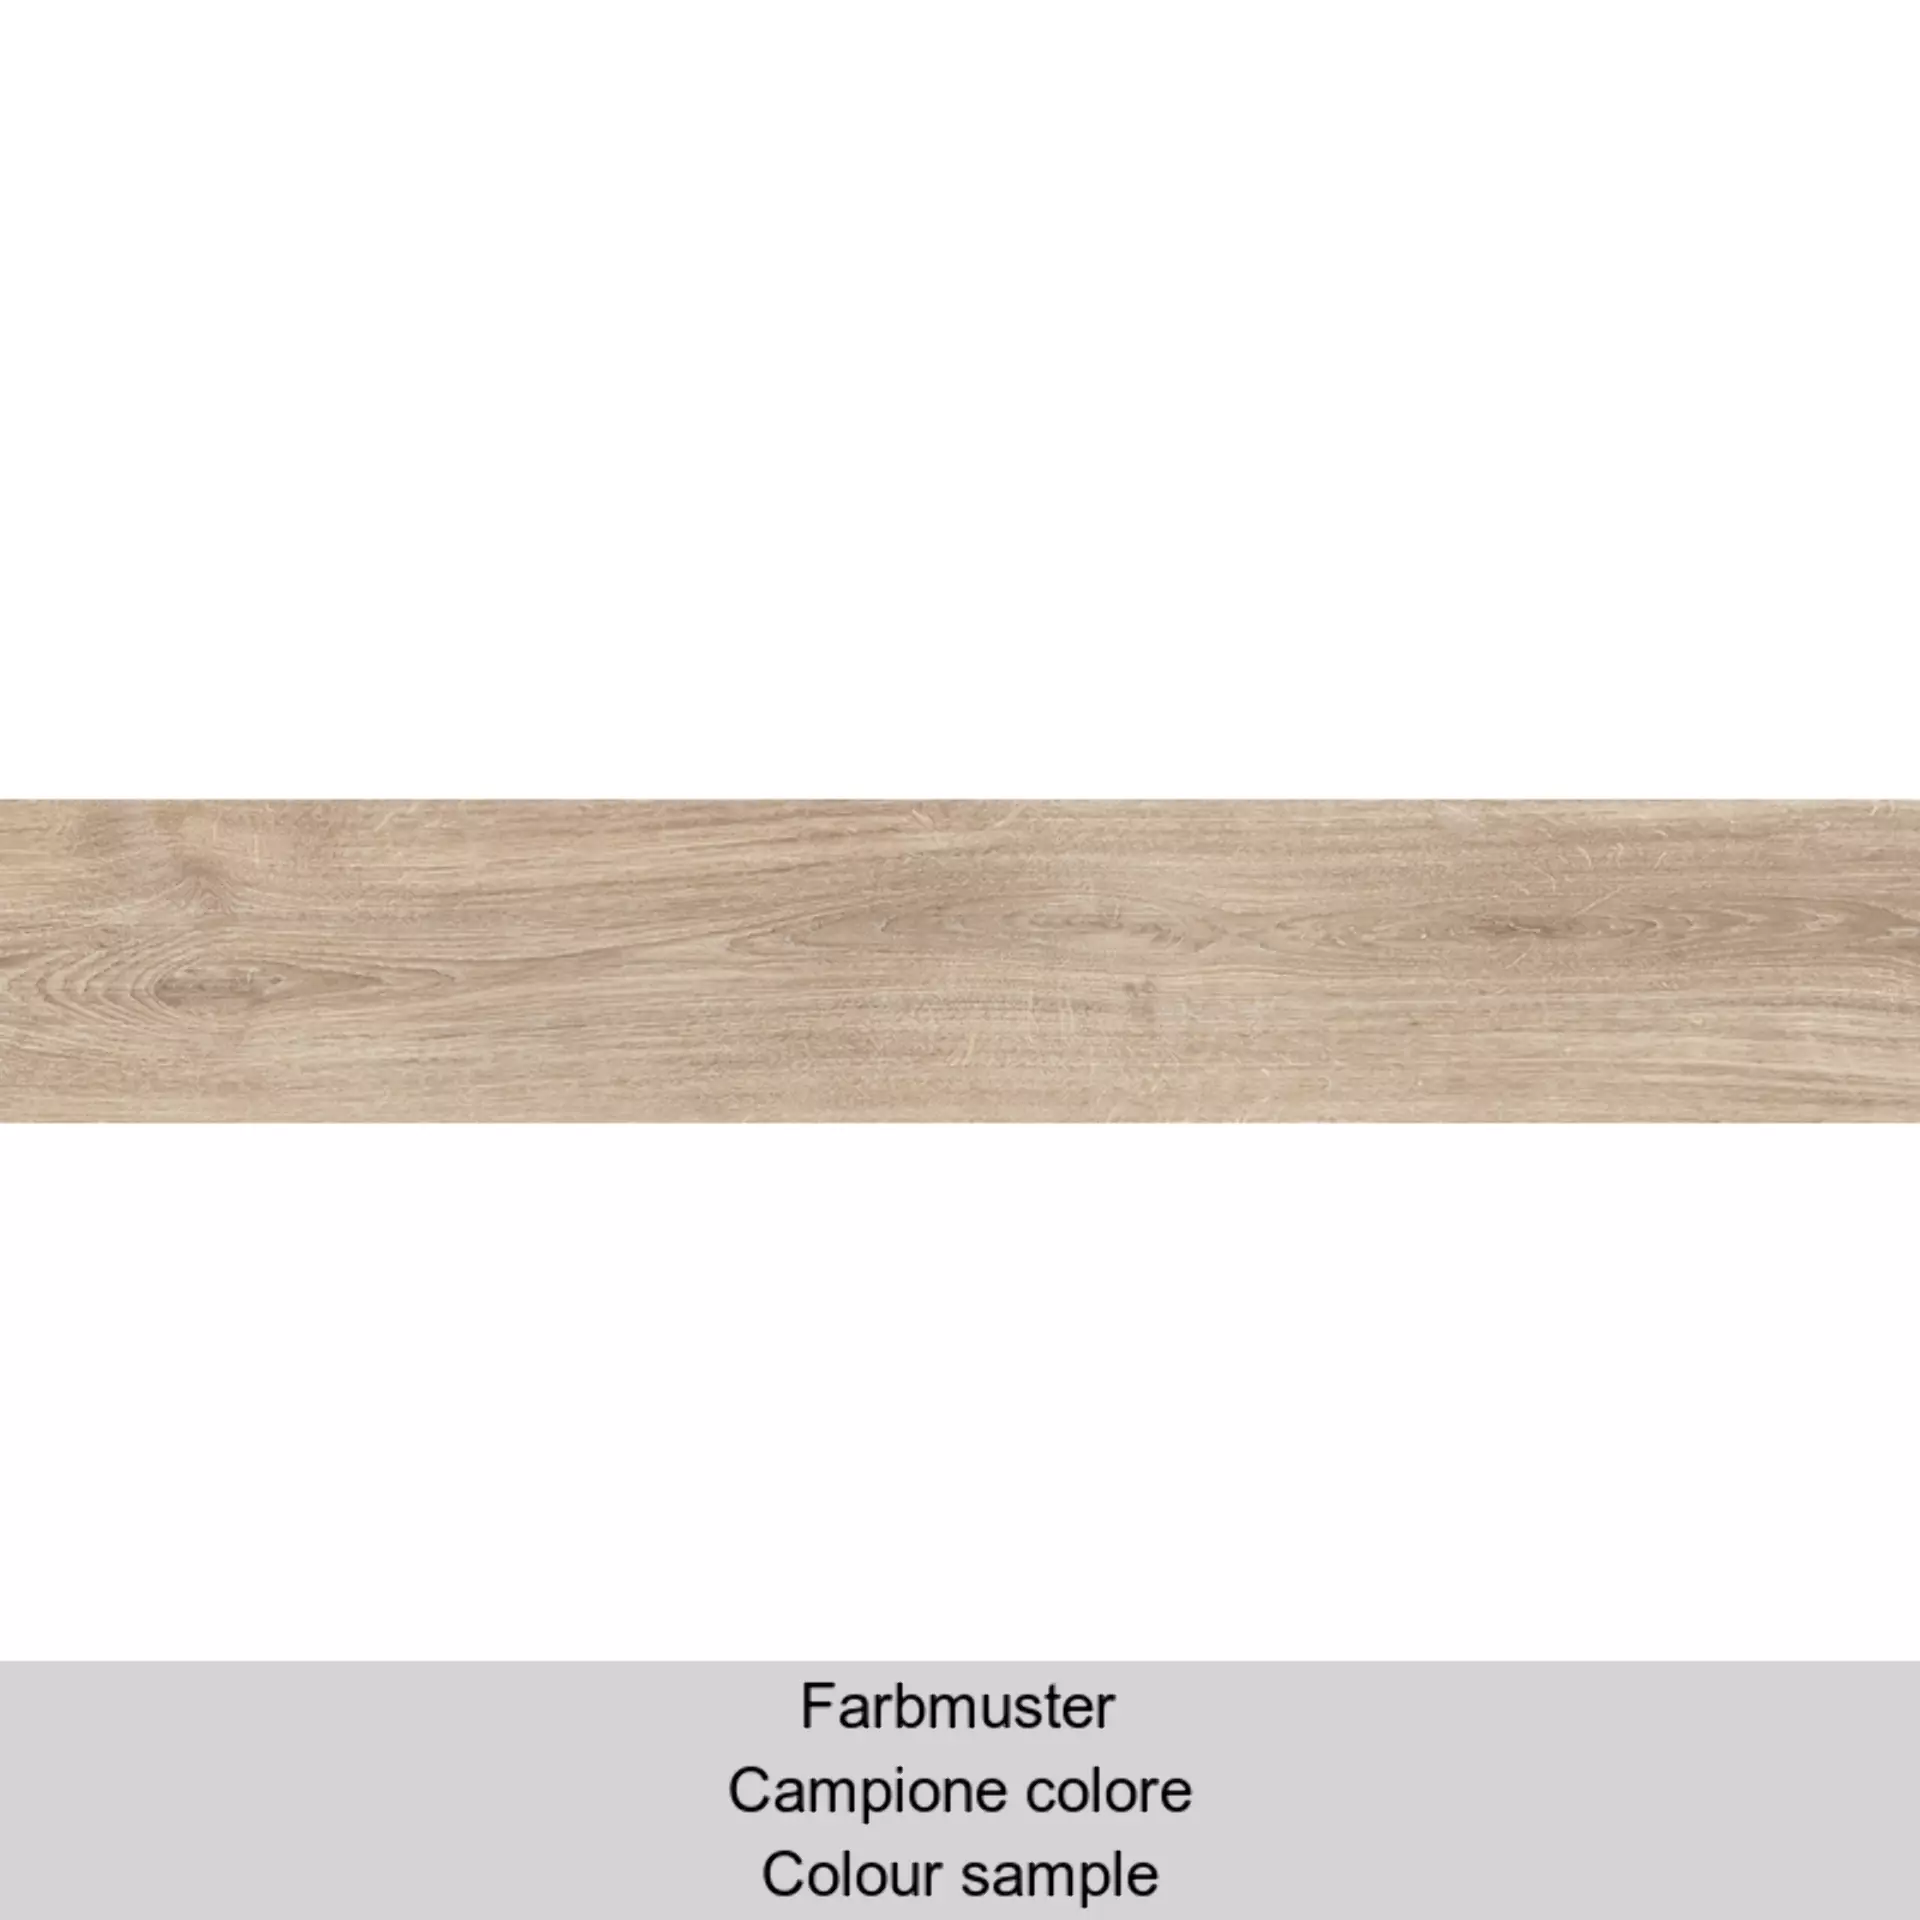 Ergon Woodtouch Miele Naturale E0LW 20x120cm rectified 9,5mm